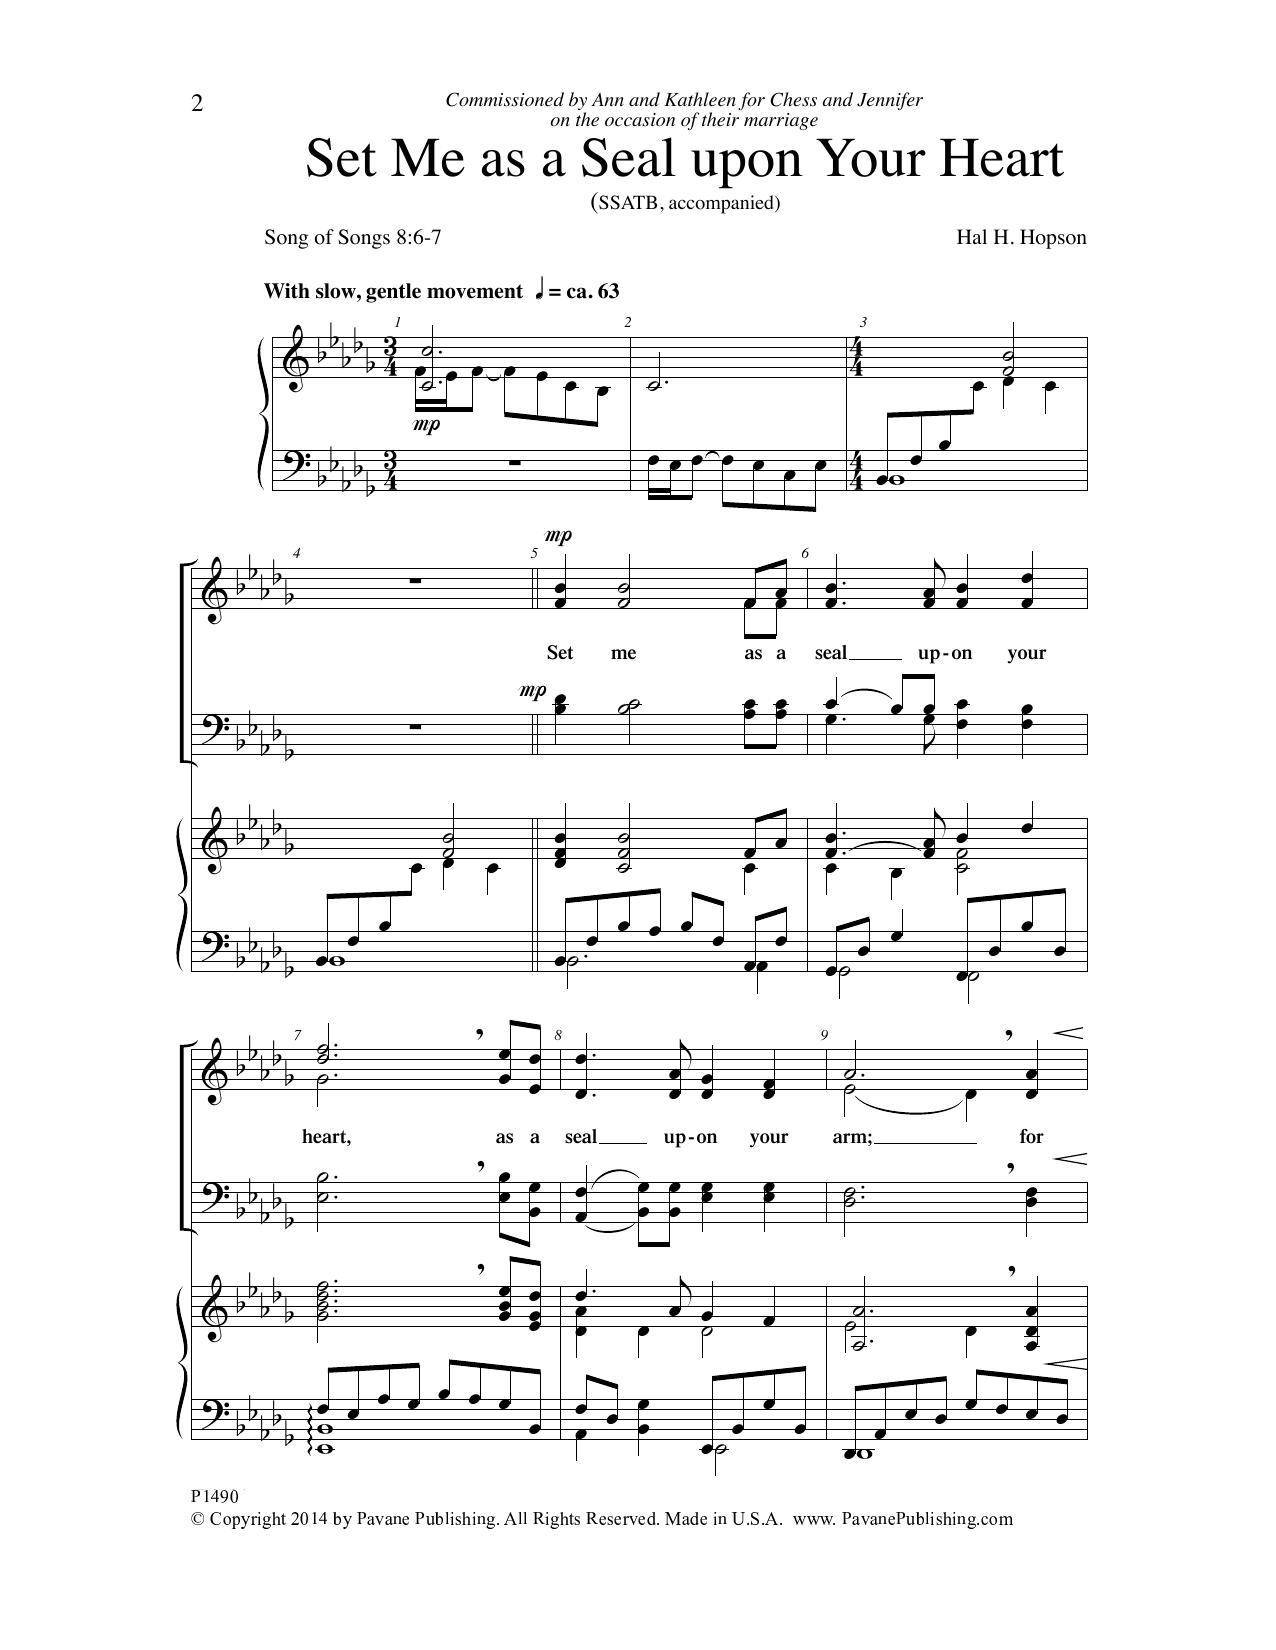 Set Me as a Seal upon Your Heart sheet music